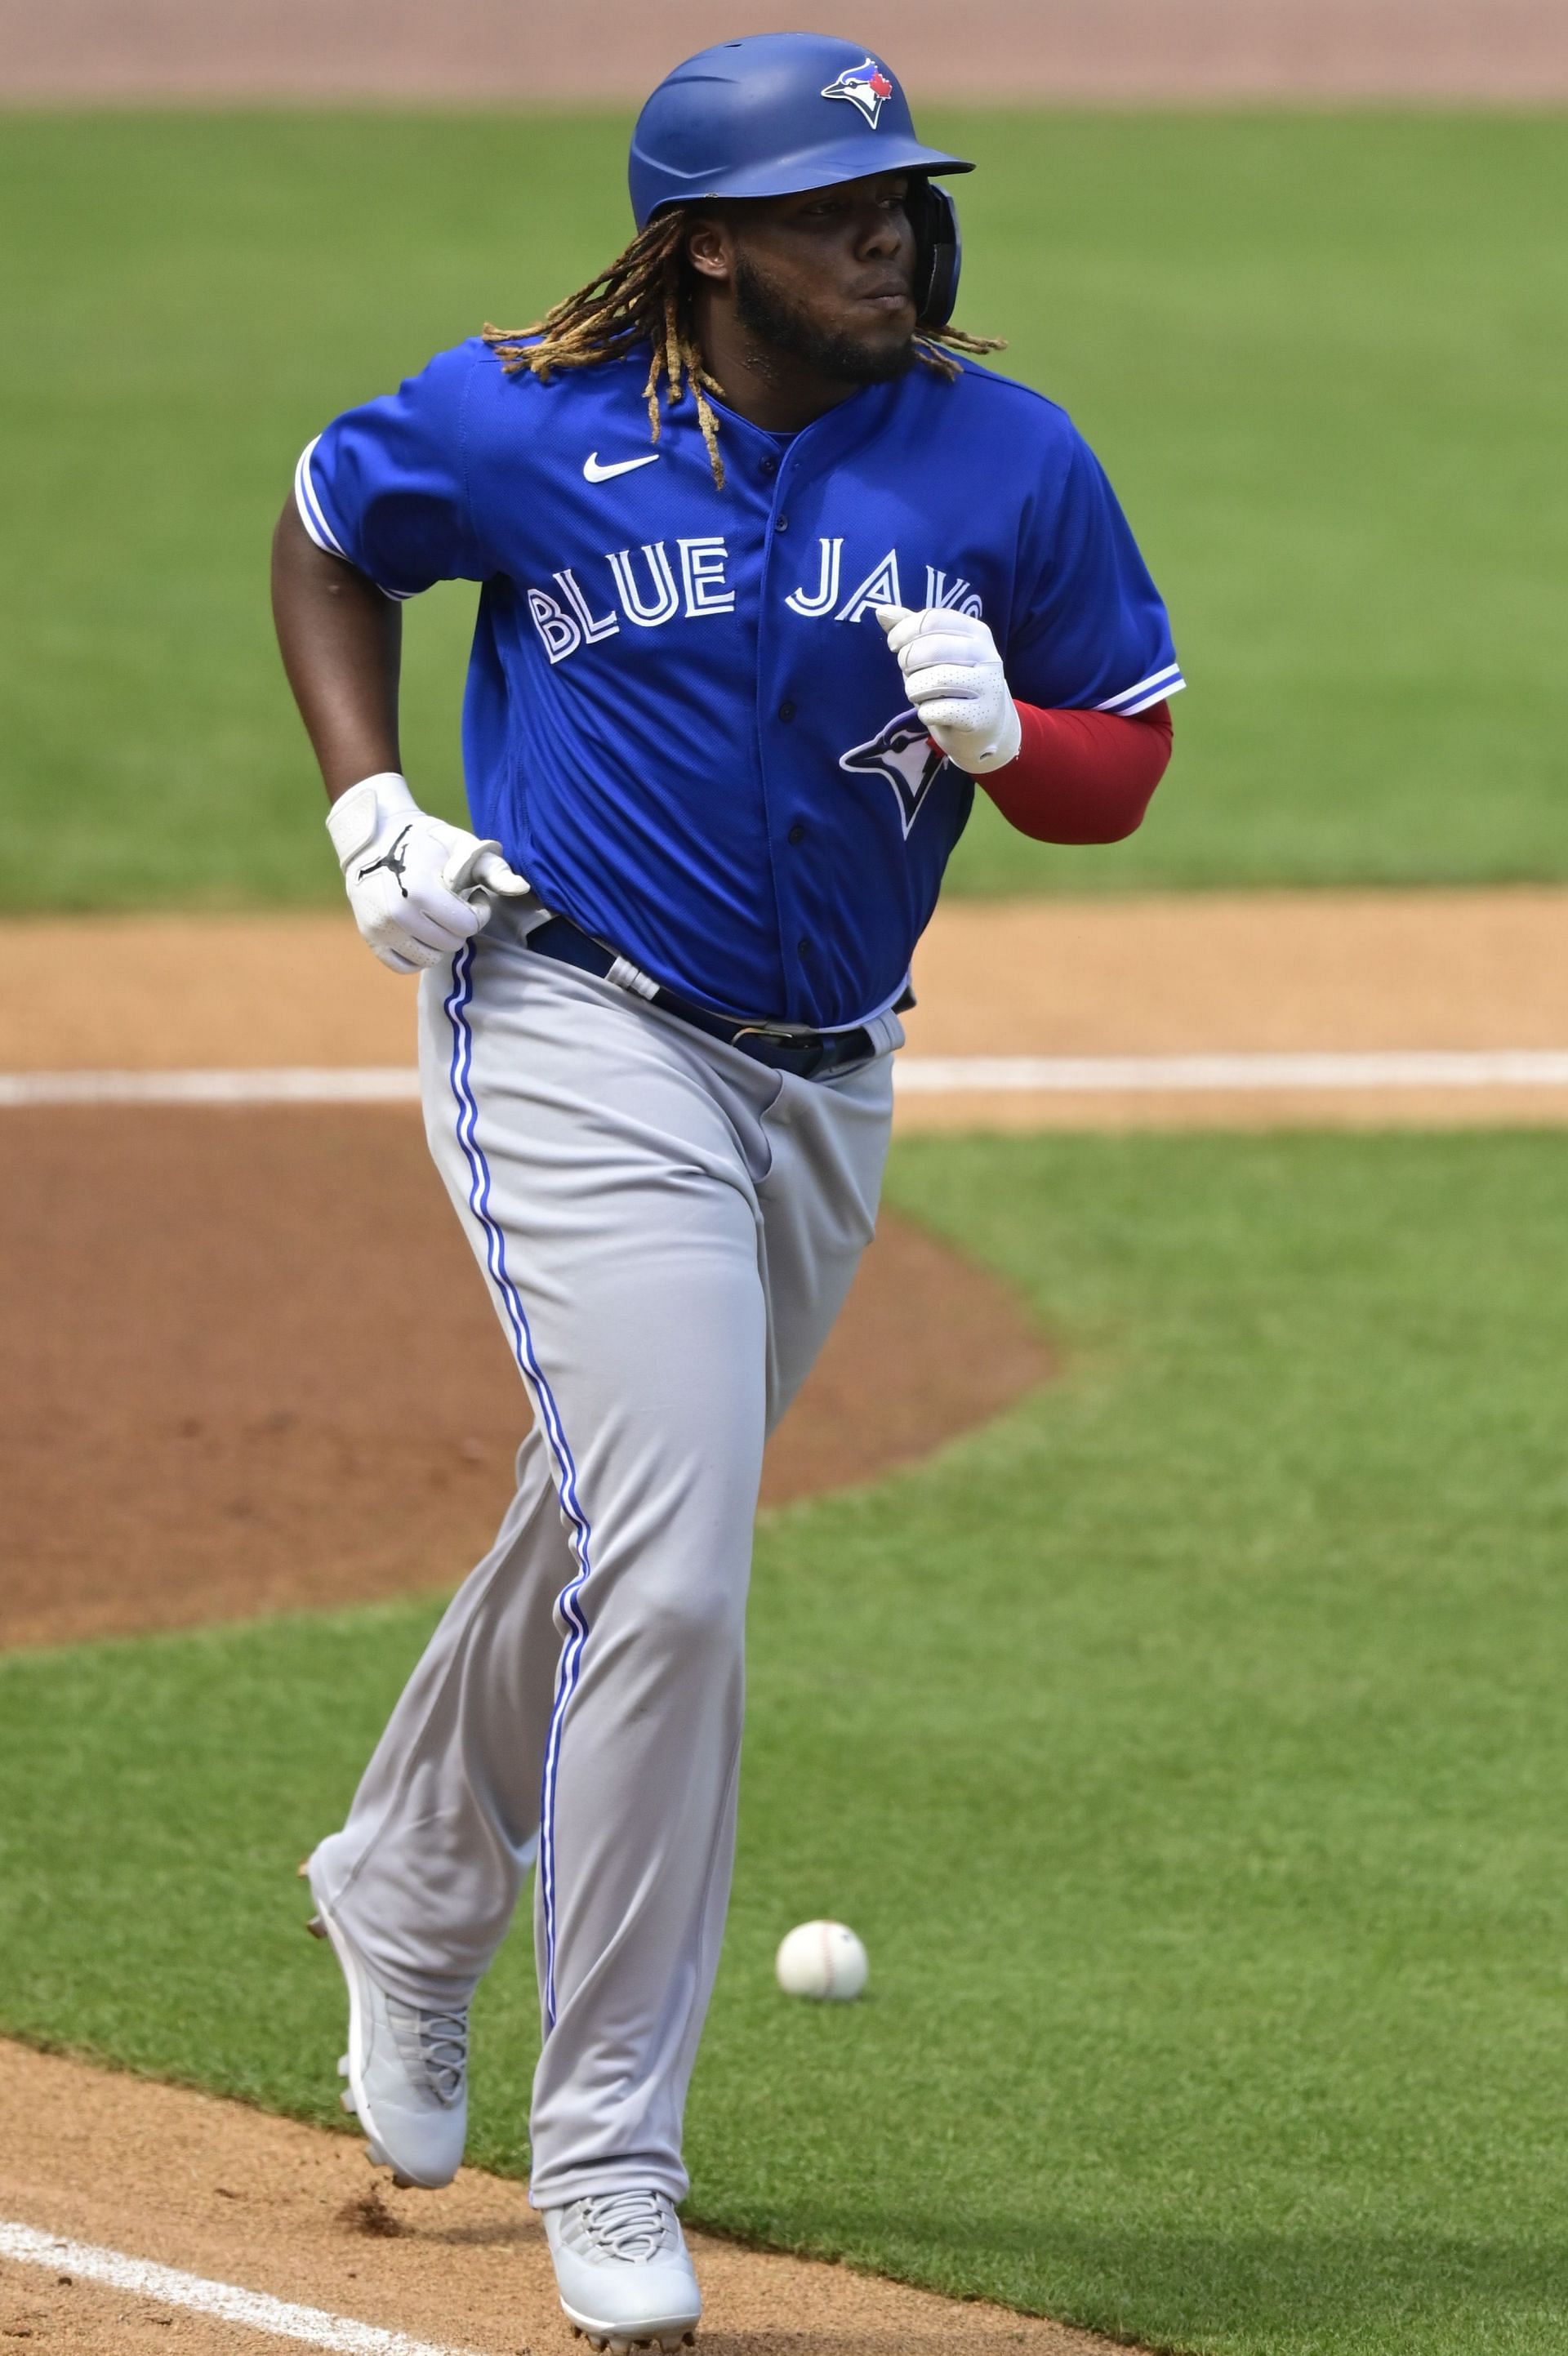 Vladimir Guerrero Jr. #27 of the Toronto Blue Jays walks to first base after being hit by a pitch during the first inning against the New York Yankees during a spring training game at George M. Steinbrenner Field on February 28, 2021 in Tampa, Florida.